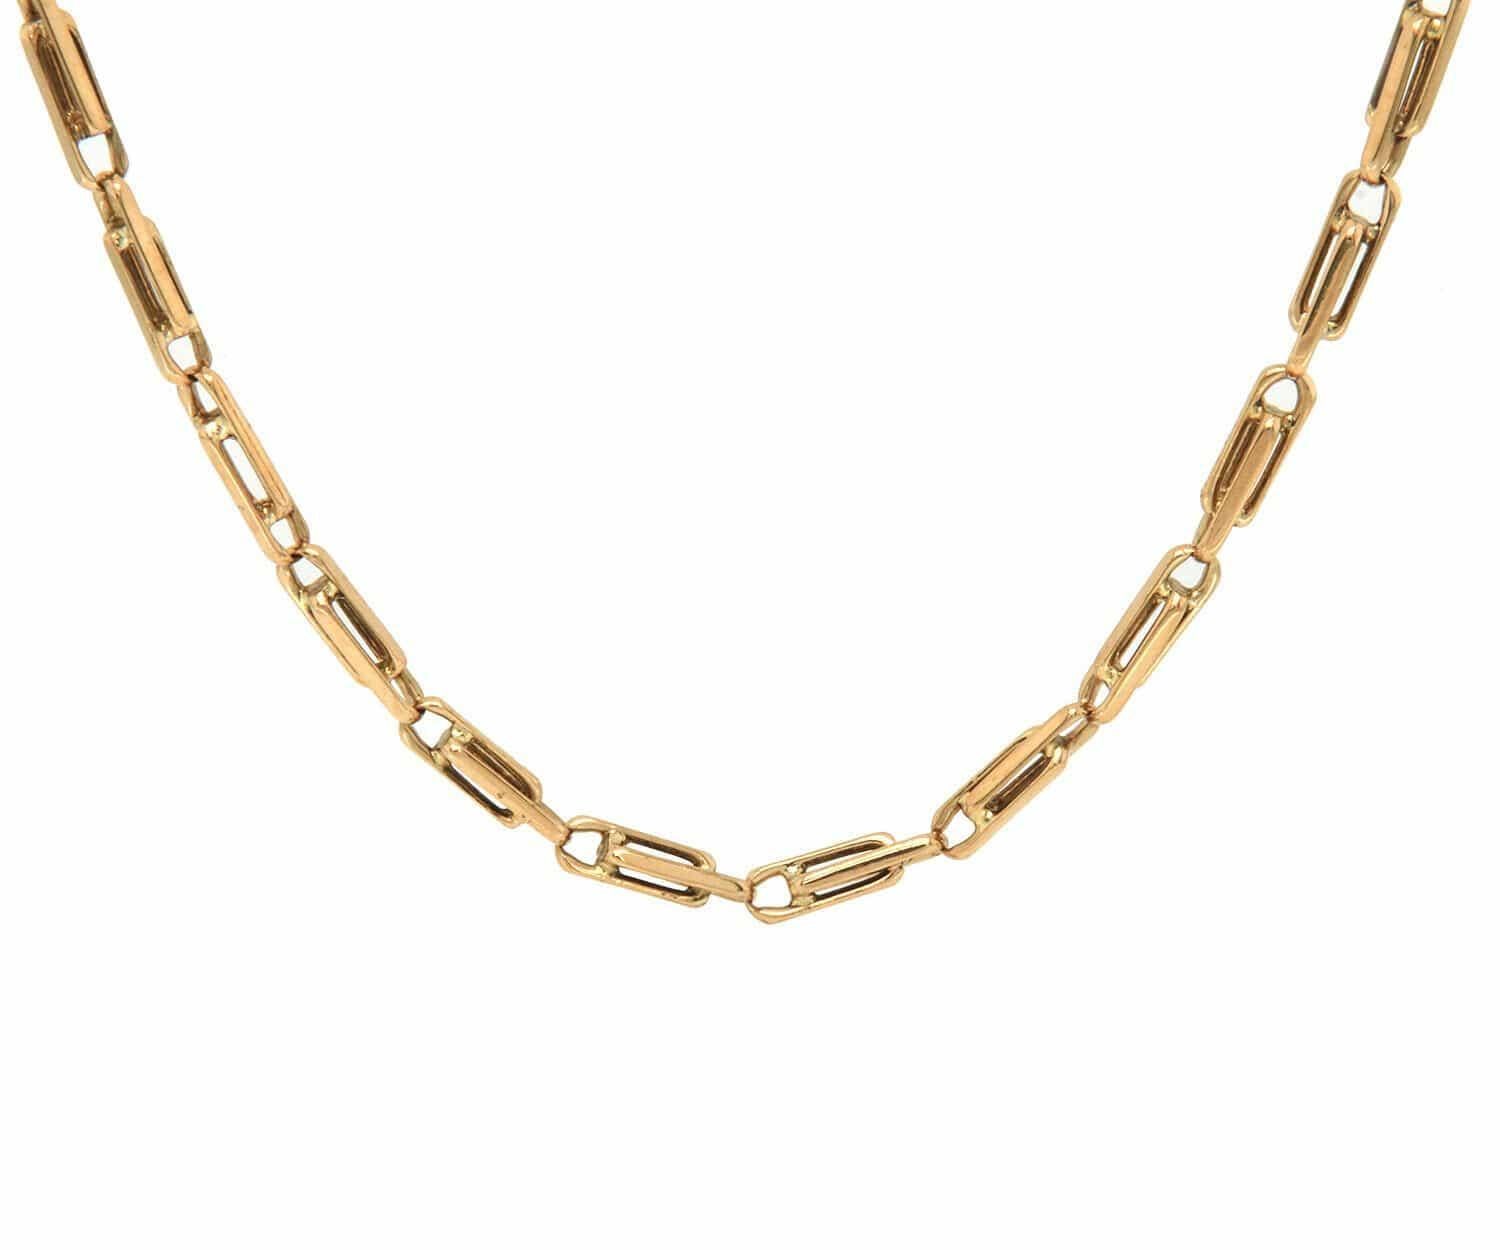 3.0 MM Fancy Link Necklace in 14K

Fancy Link Necklace
14K Yellow Gold
Necklace Width: Approx. 3.0 MM
Necklace Length: Approx. 16.0 Inches
Weight: Approx. 14.40 Grams

Condition:
Offered for your consideration is a previously owned fancy link